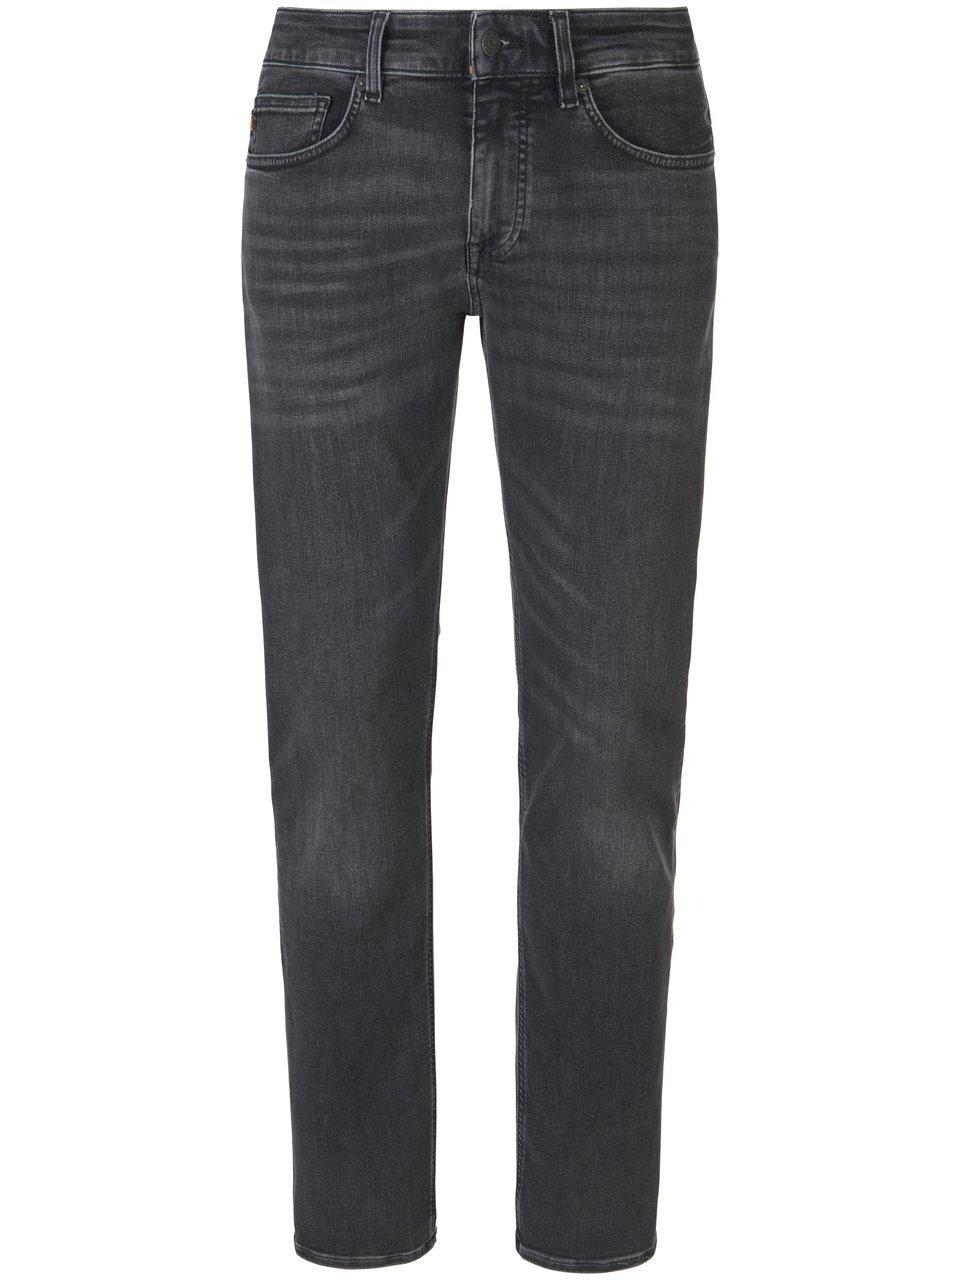 BOSS - Jeans 'Delaware BC-P' in inchlengte 32